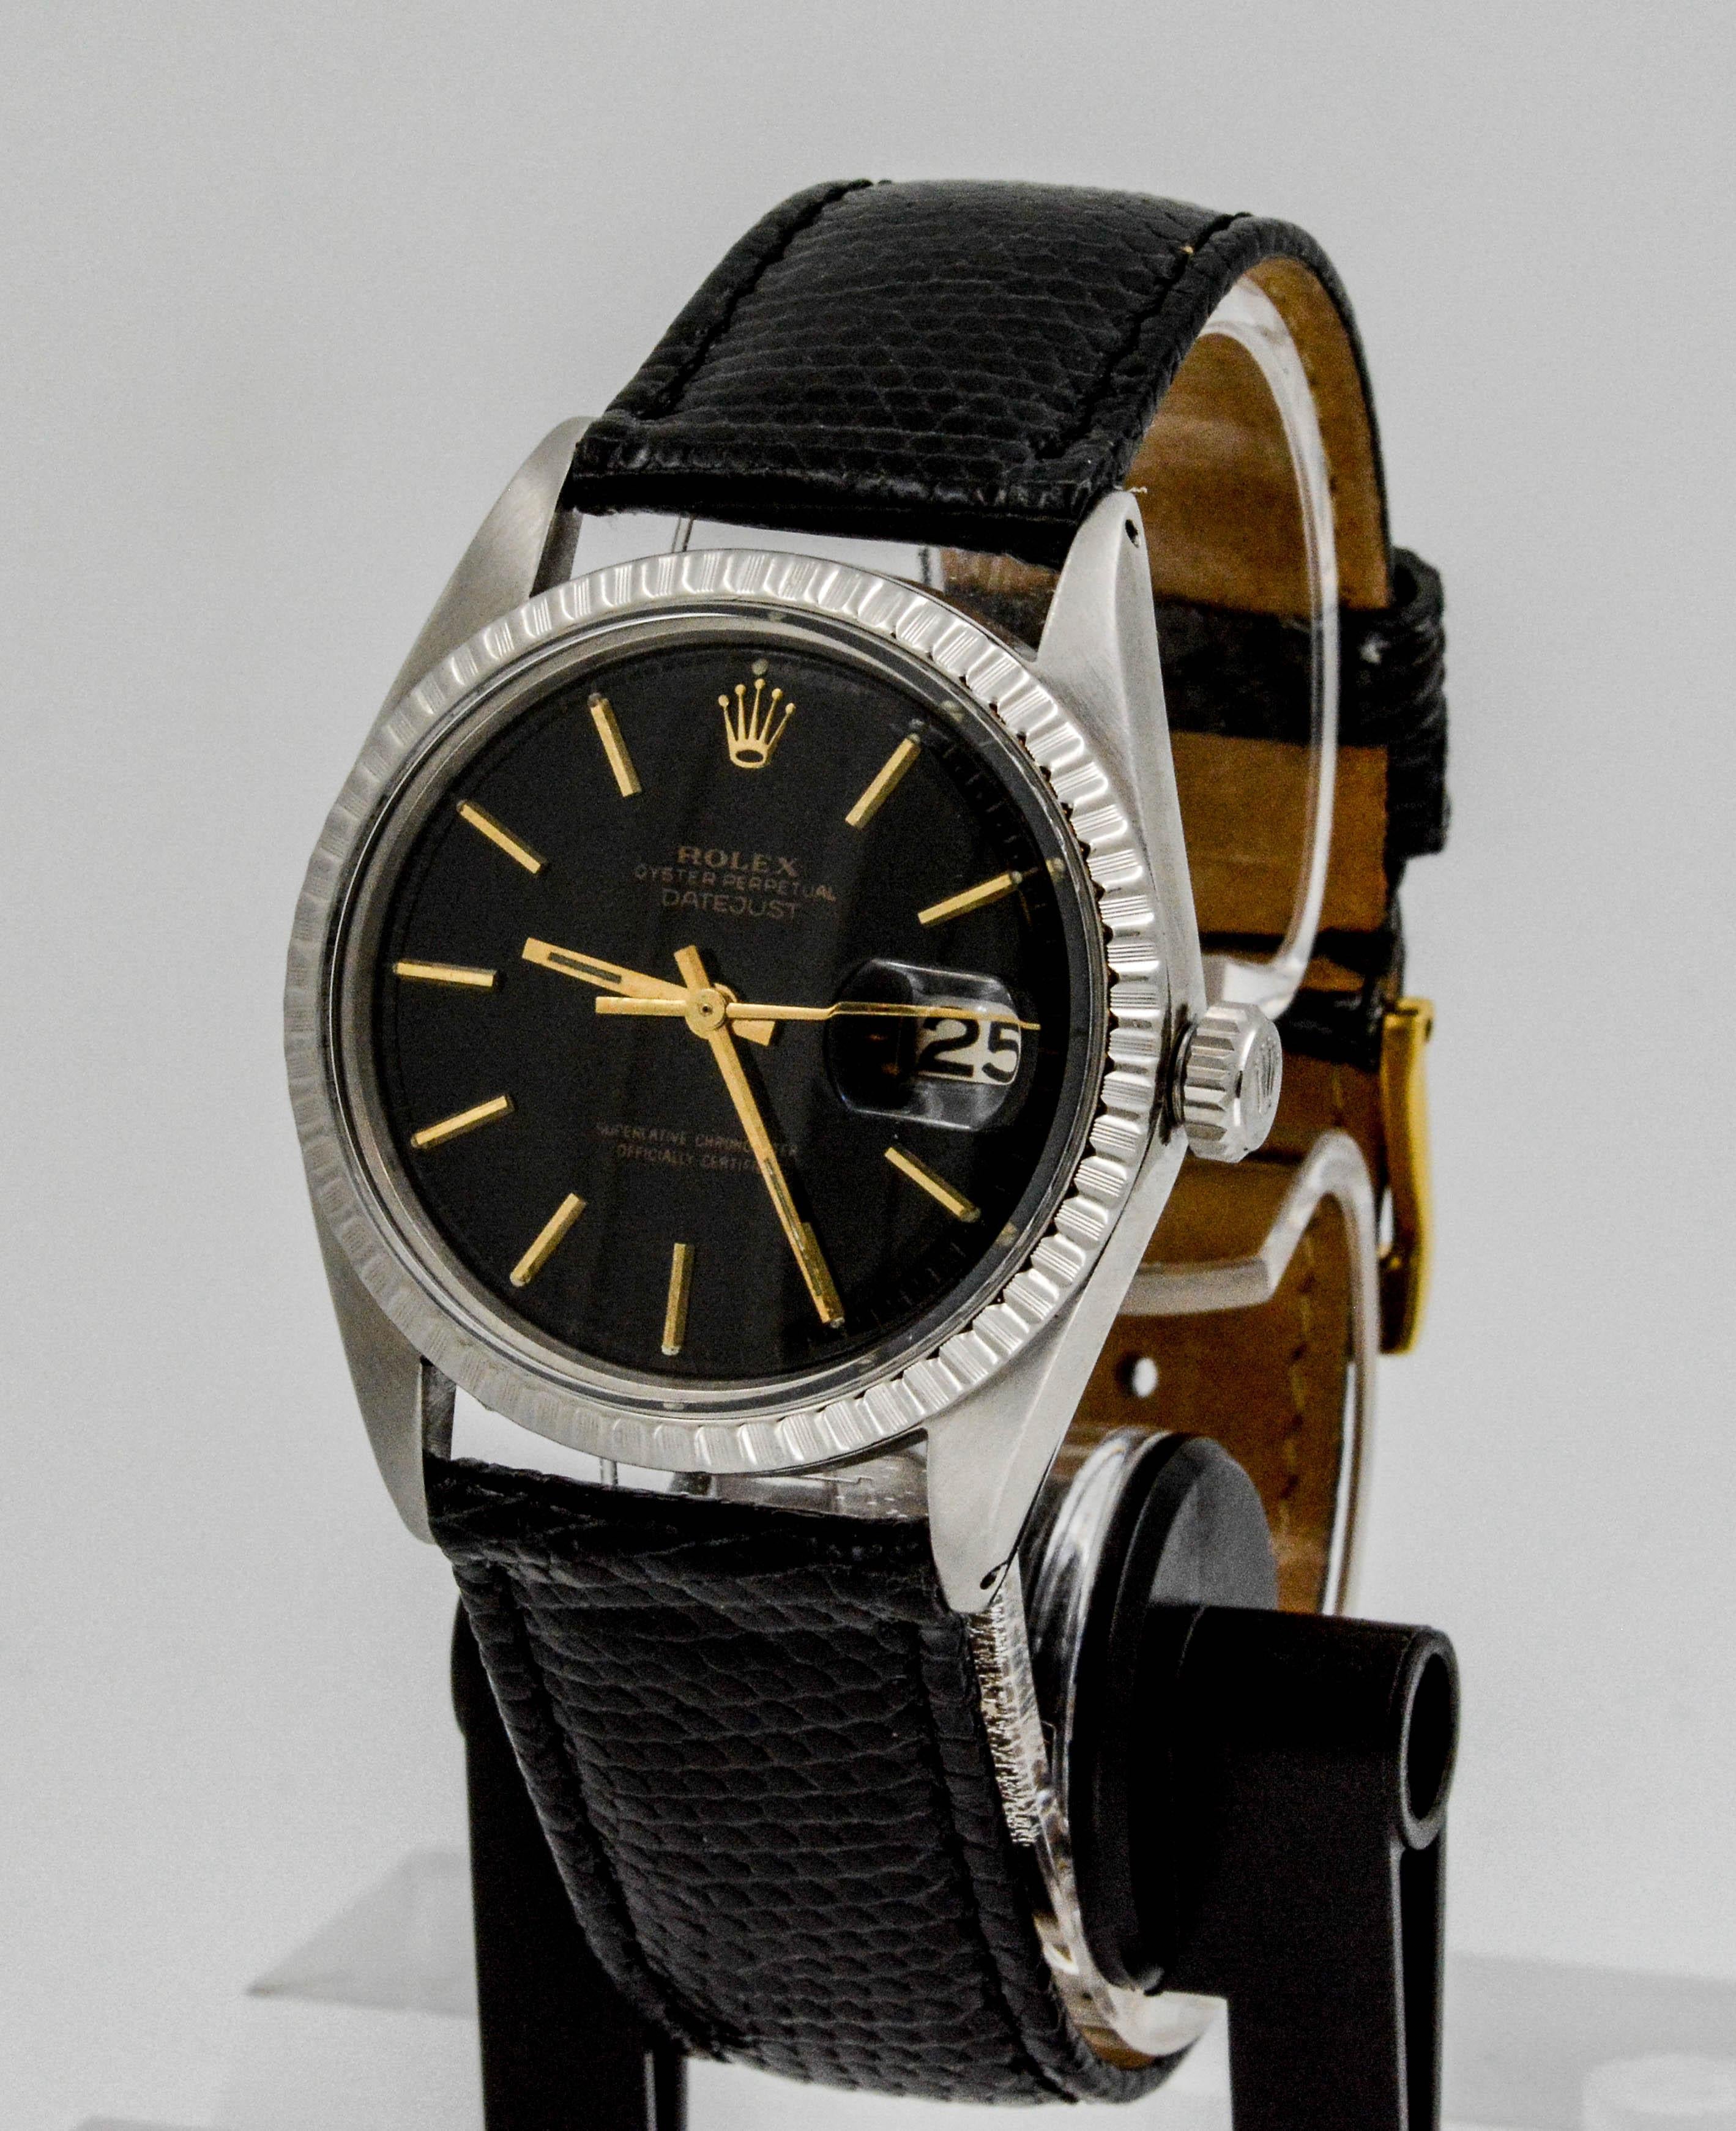 • Model: Rolex DATEJUST 
• Movement: Perpetual, automatic 
• Case Size: 36mm 
• Case Material: Stainless steel with fluted bezel, acrylic crystal 
• Dial: Black dial with gold stick markers
• Strap: Black lizard leather (not an authentic Rolex